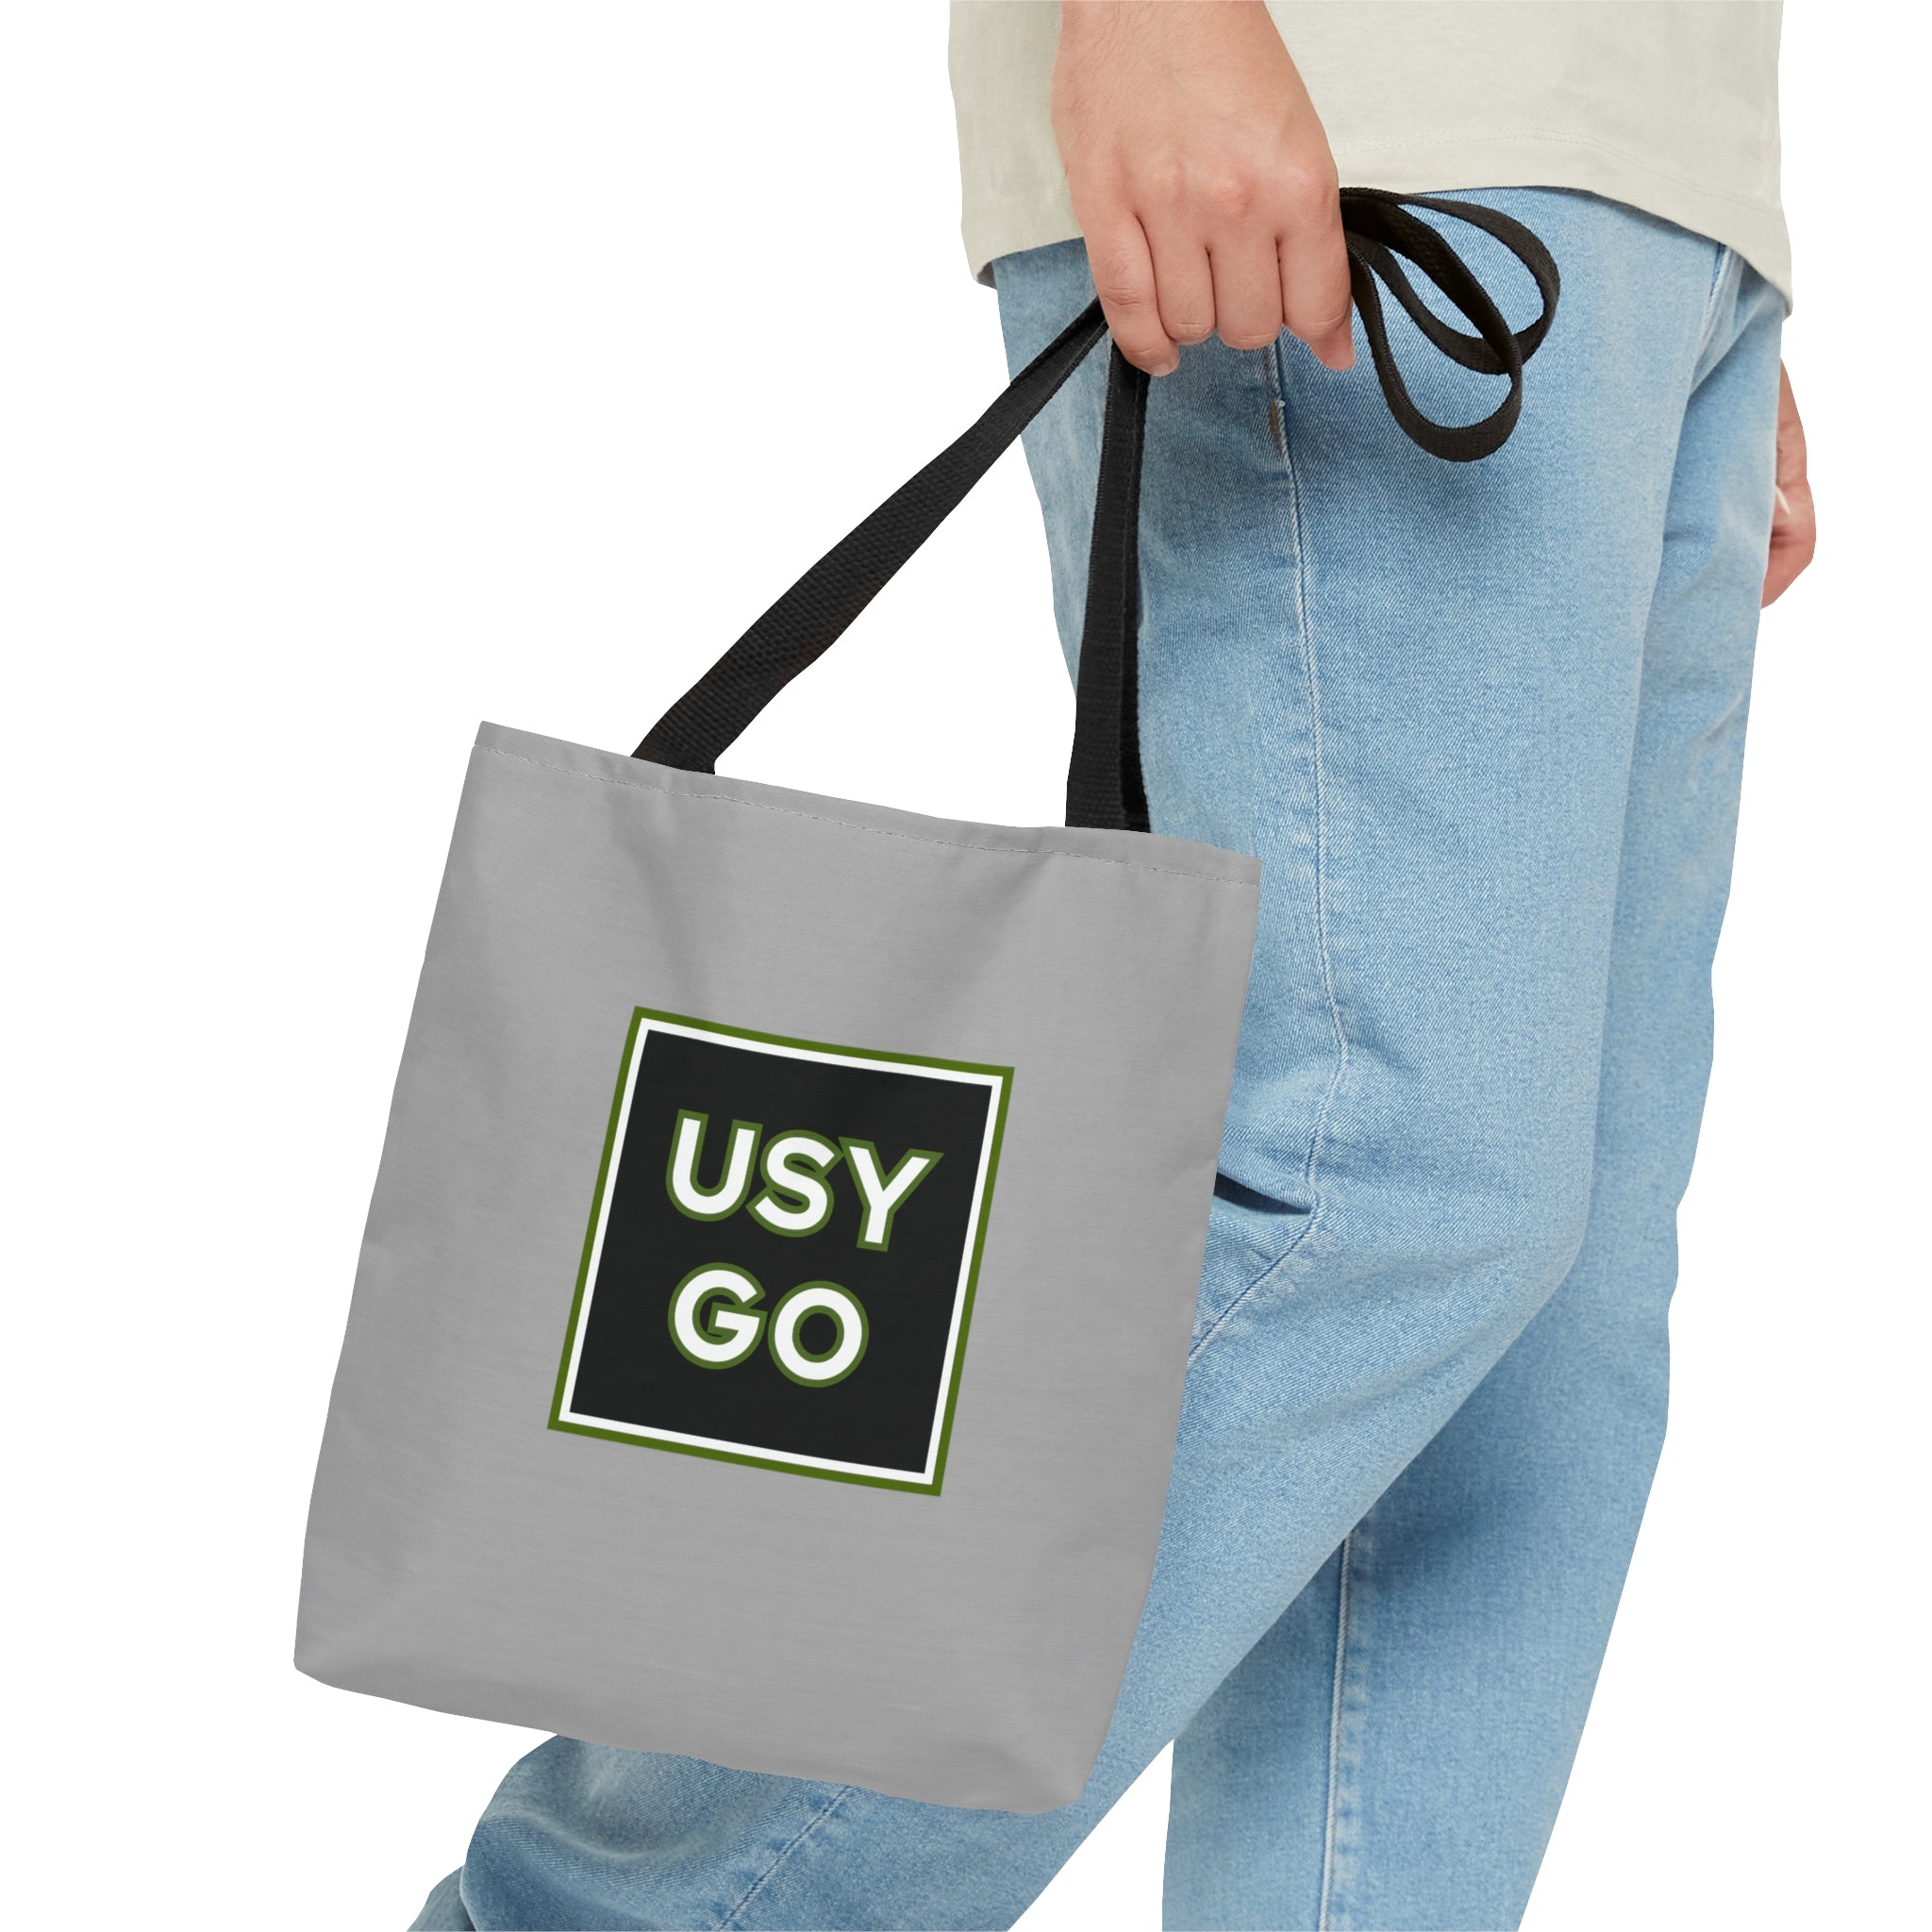 Light Grey USYGO Tote Bags in 3 Sizes